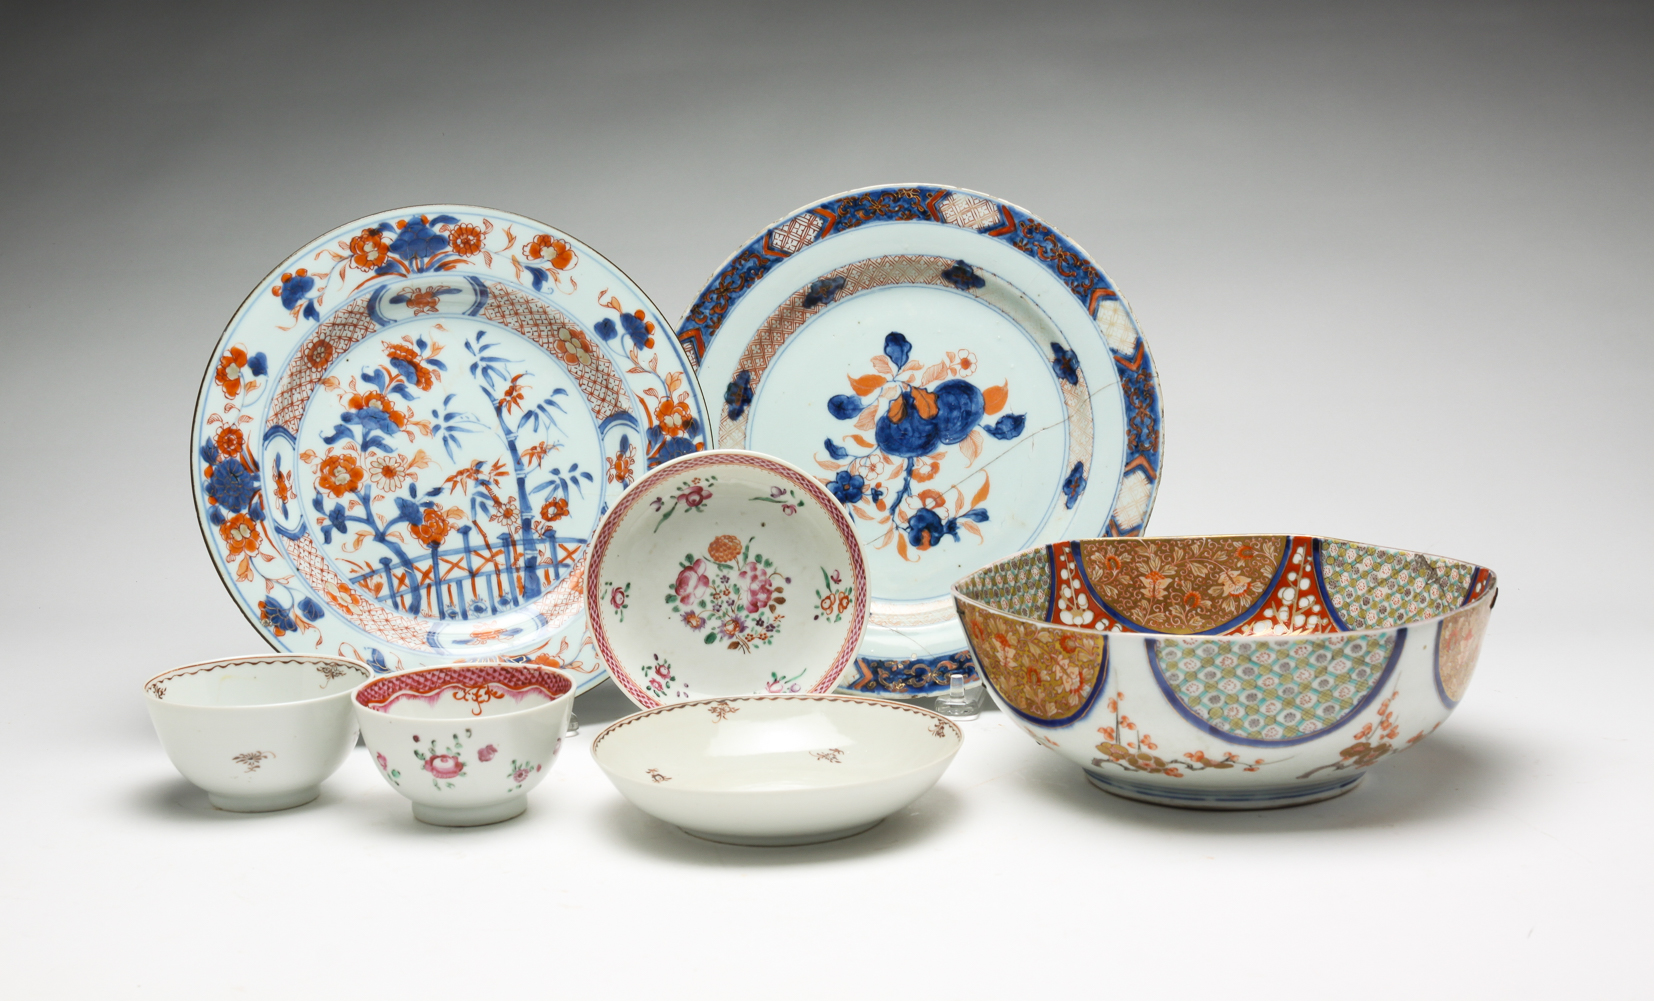 FIVE PIECES OF CHINESE PORCELAIN  2df904